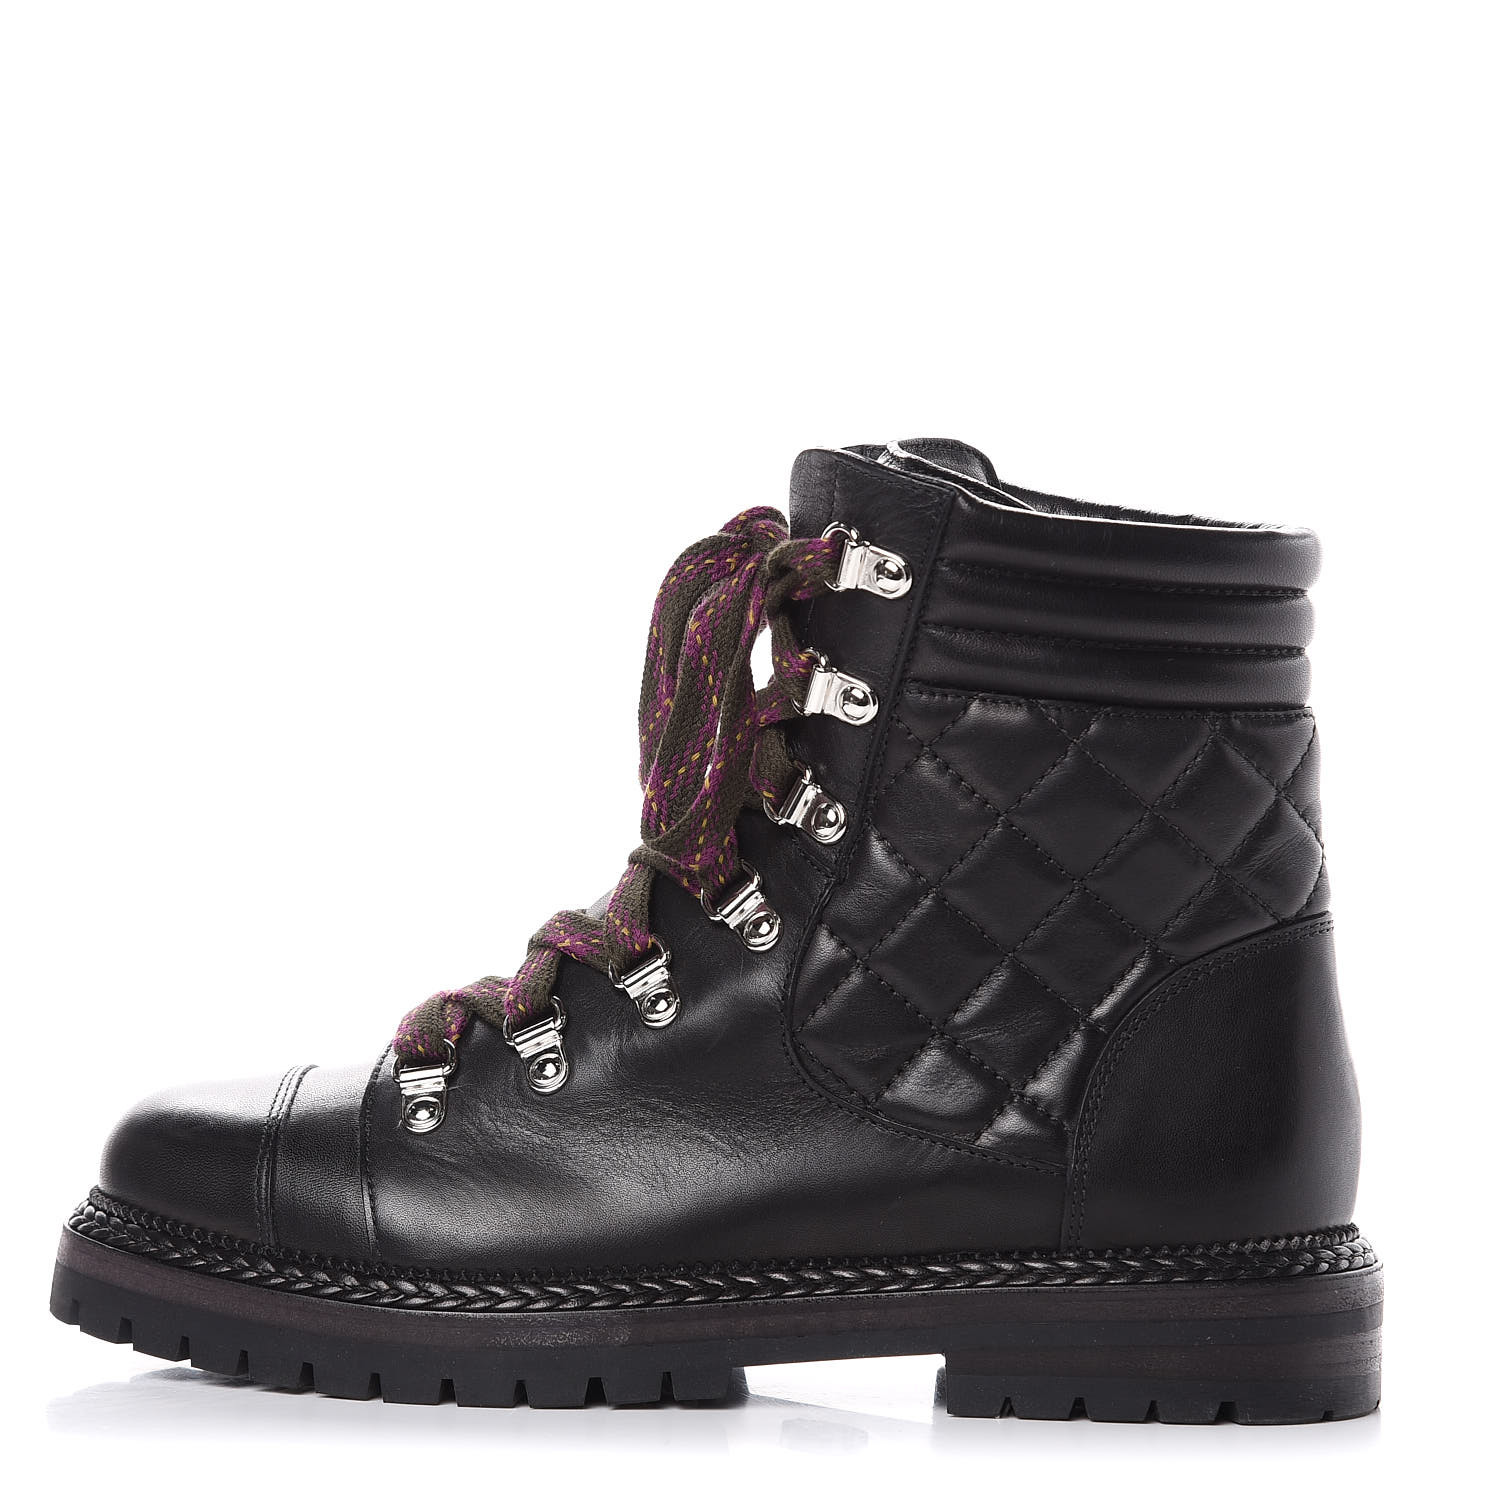 CHANEL Lambskin Quilted Lace Up Boots 